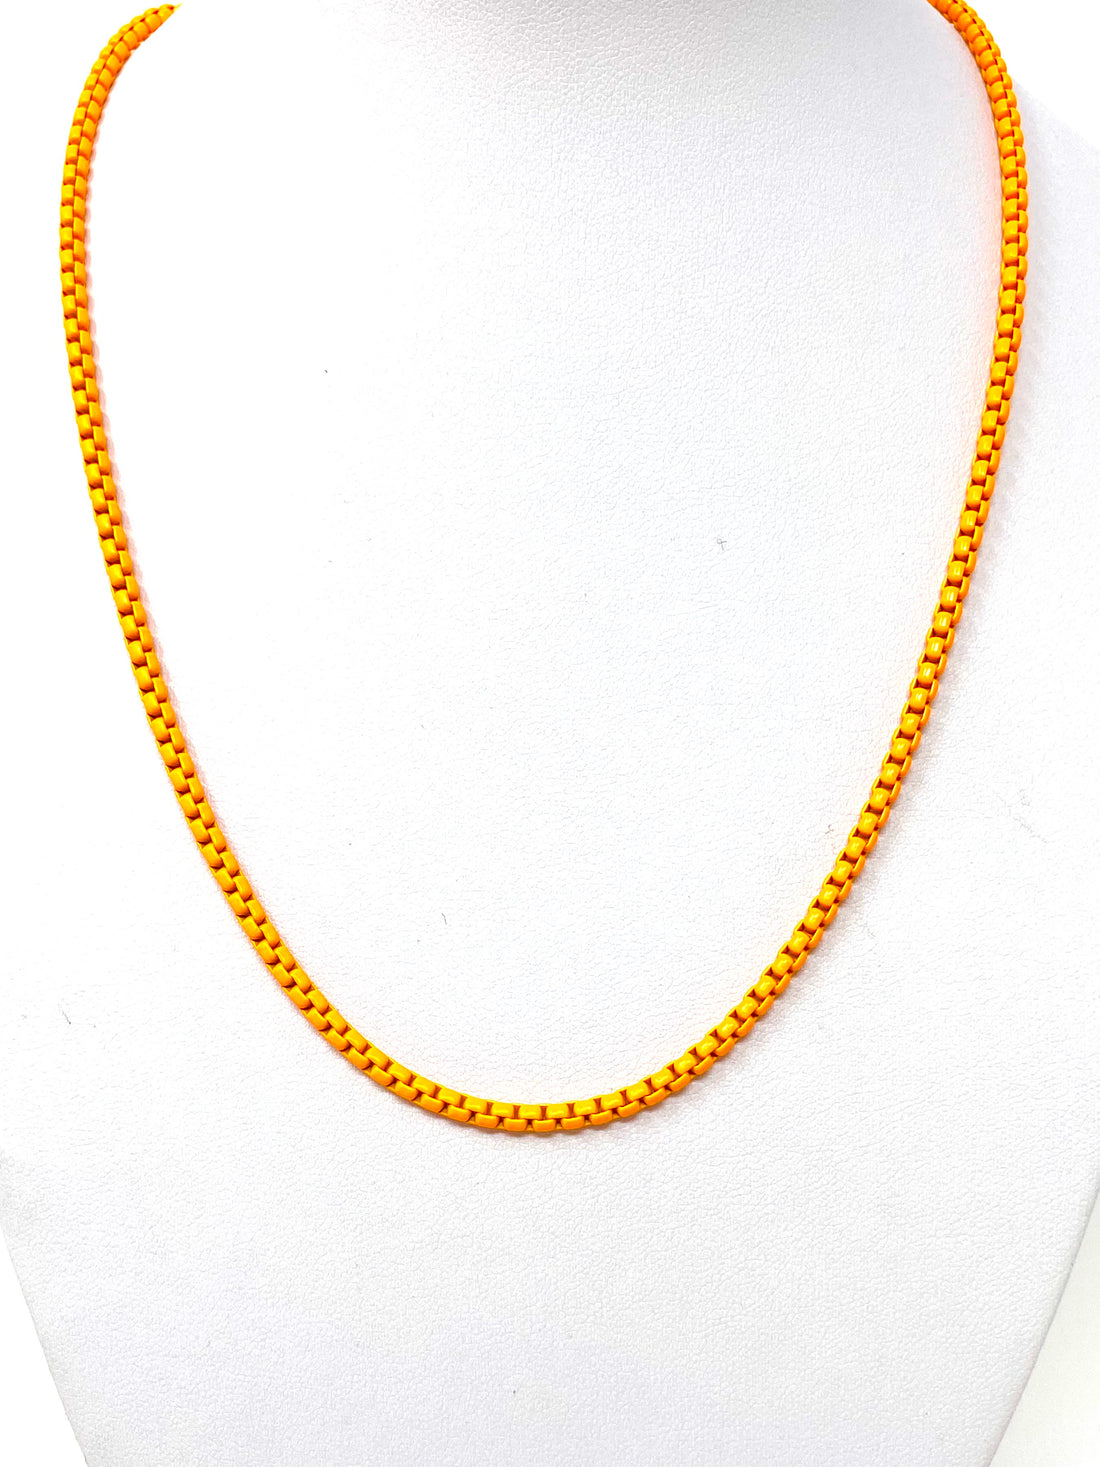 Color Coated Chain in Neon Orange